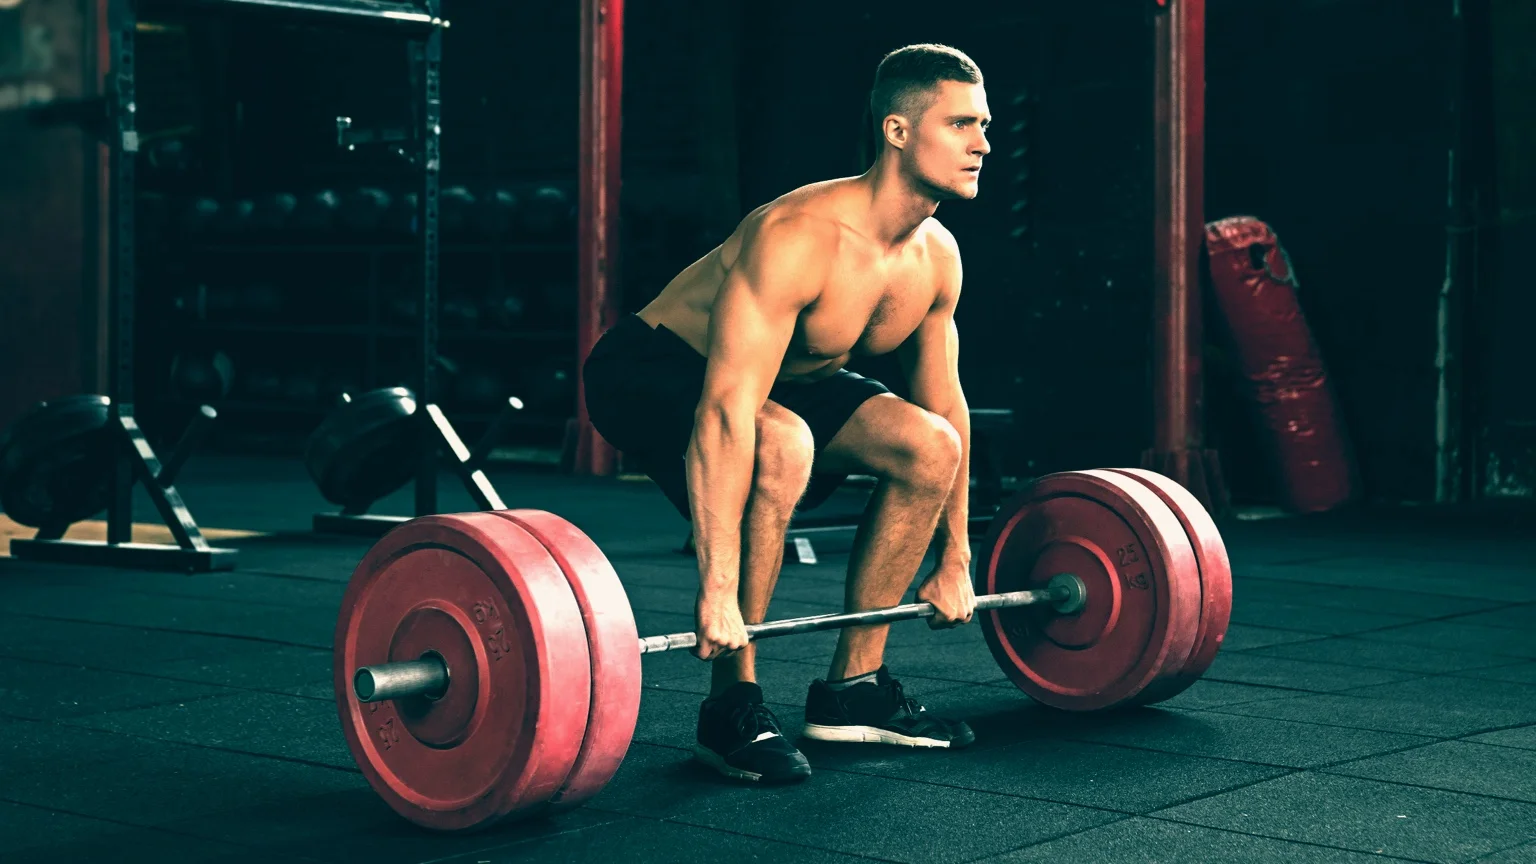 photo - Man performs a deadlift, one of three powerlifting exercises